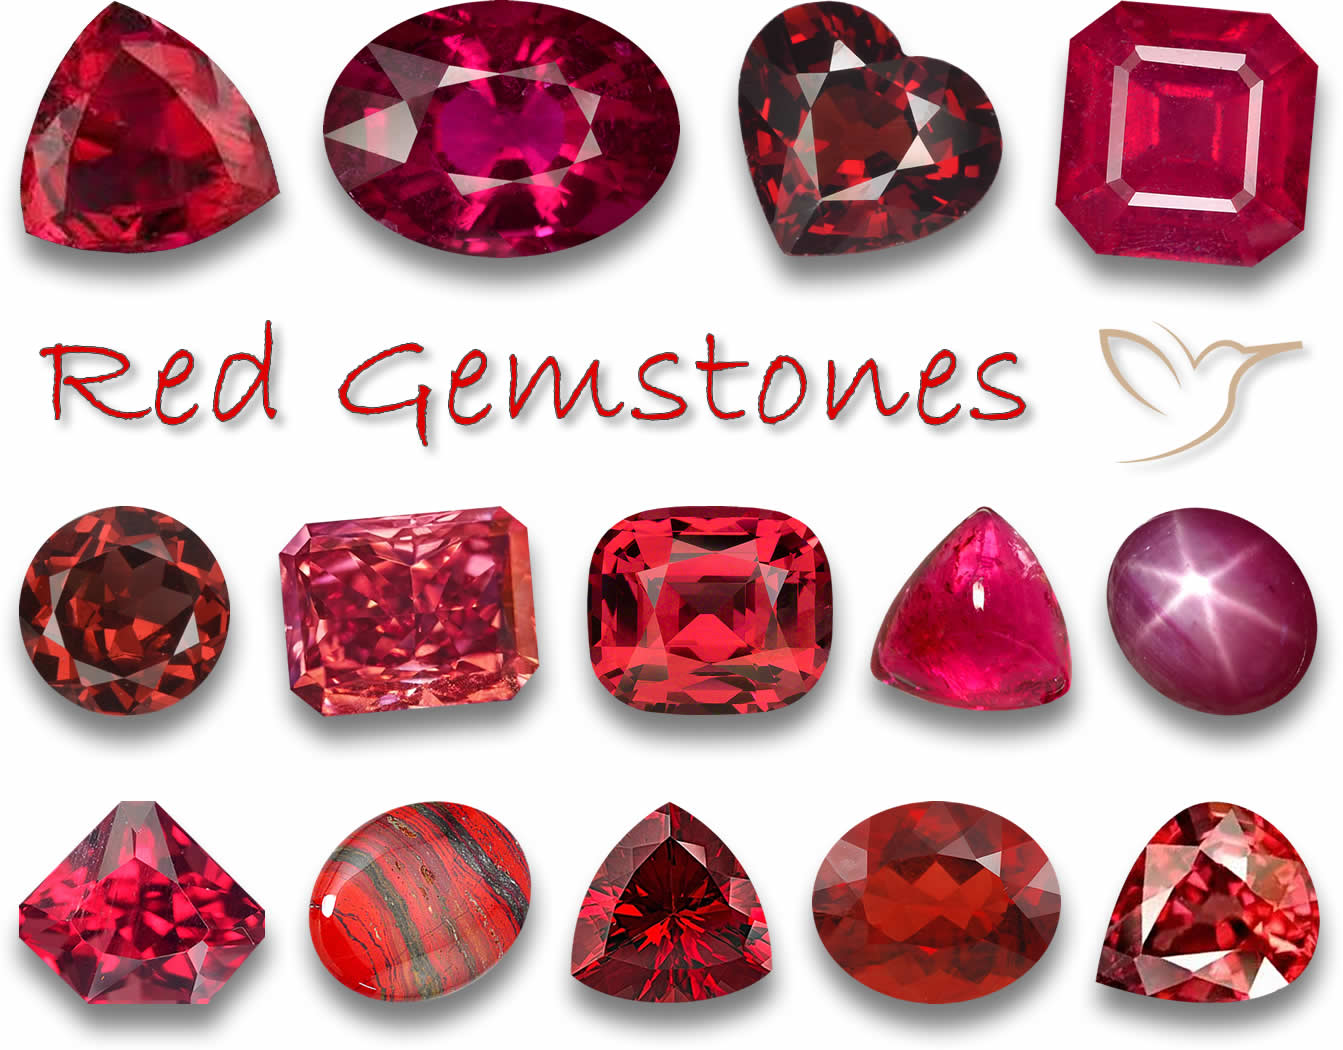 I hand place every single gemstone and pearl to create a unique